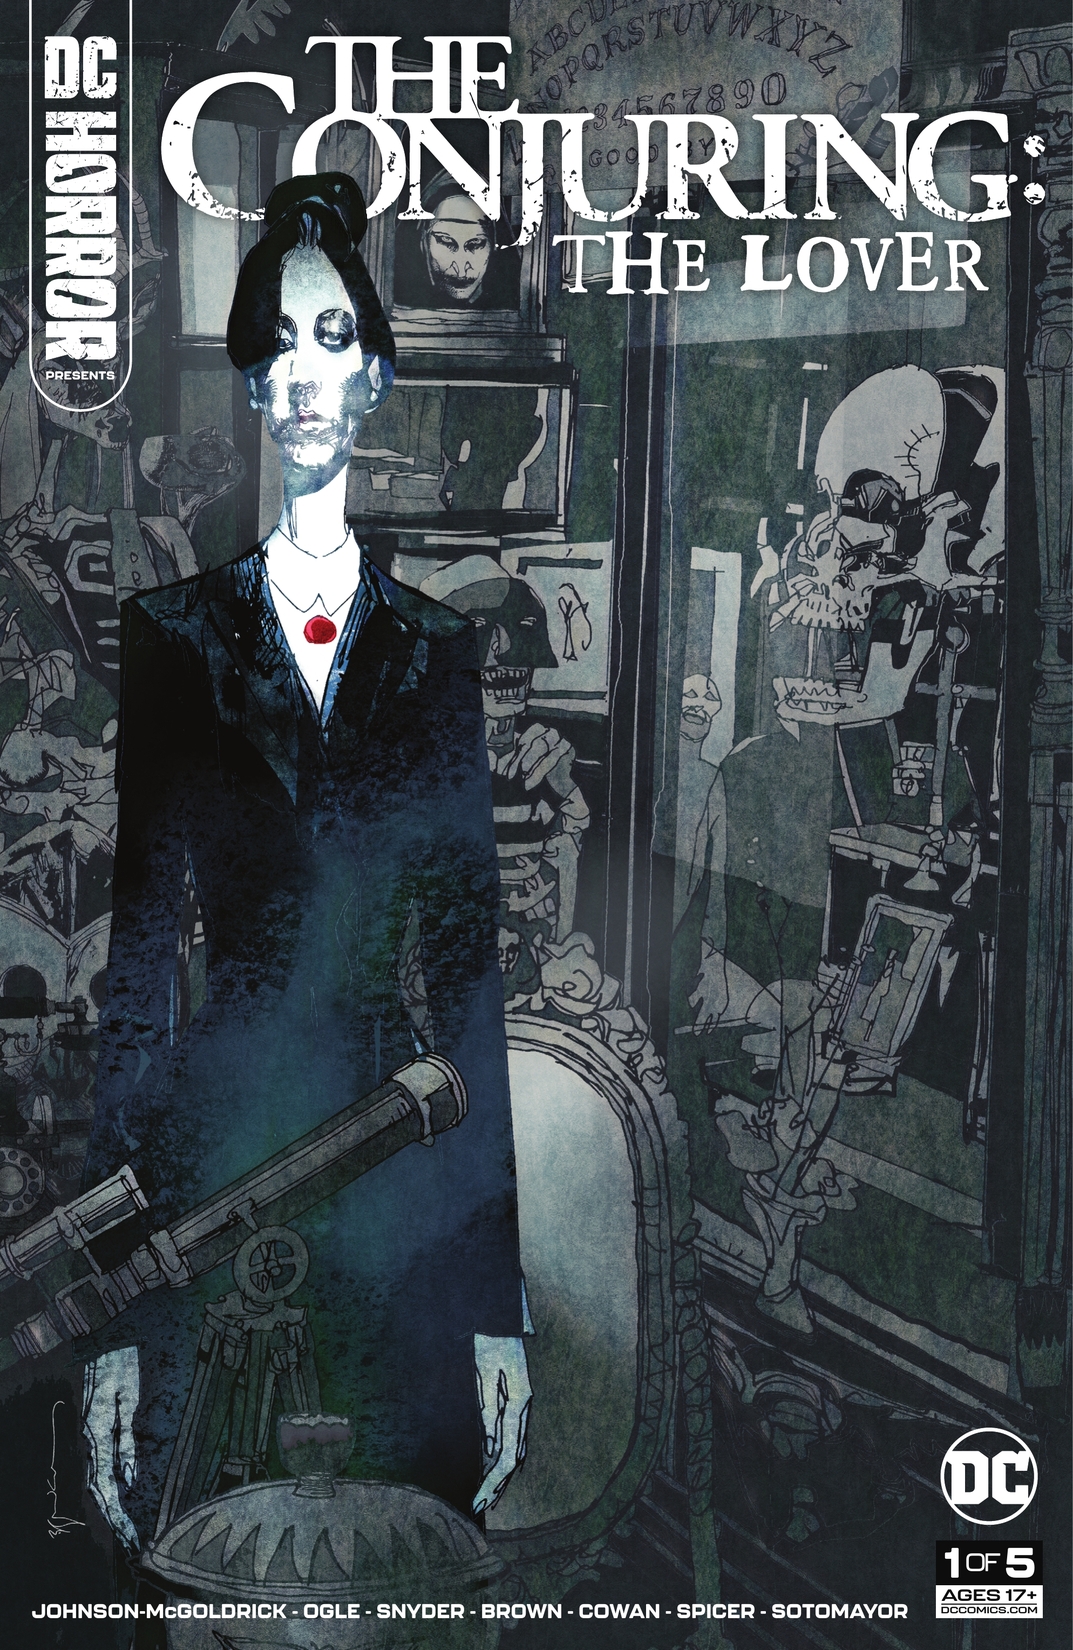 DC Horror Presents: The Conjuring: The Lover #1 preview images